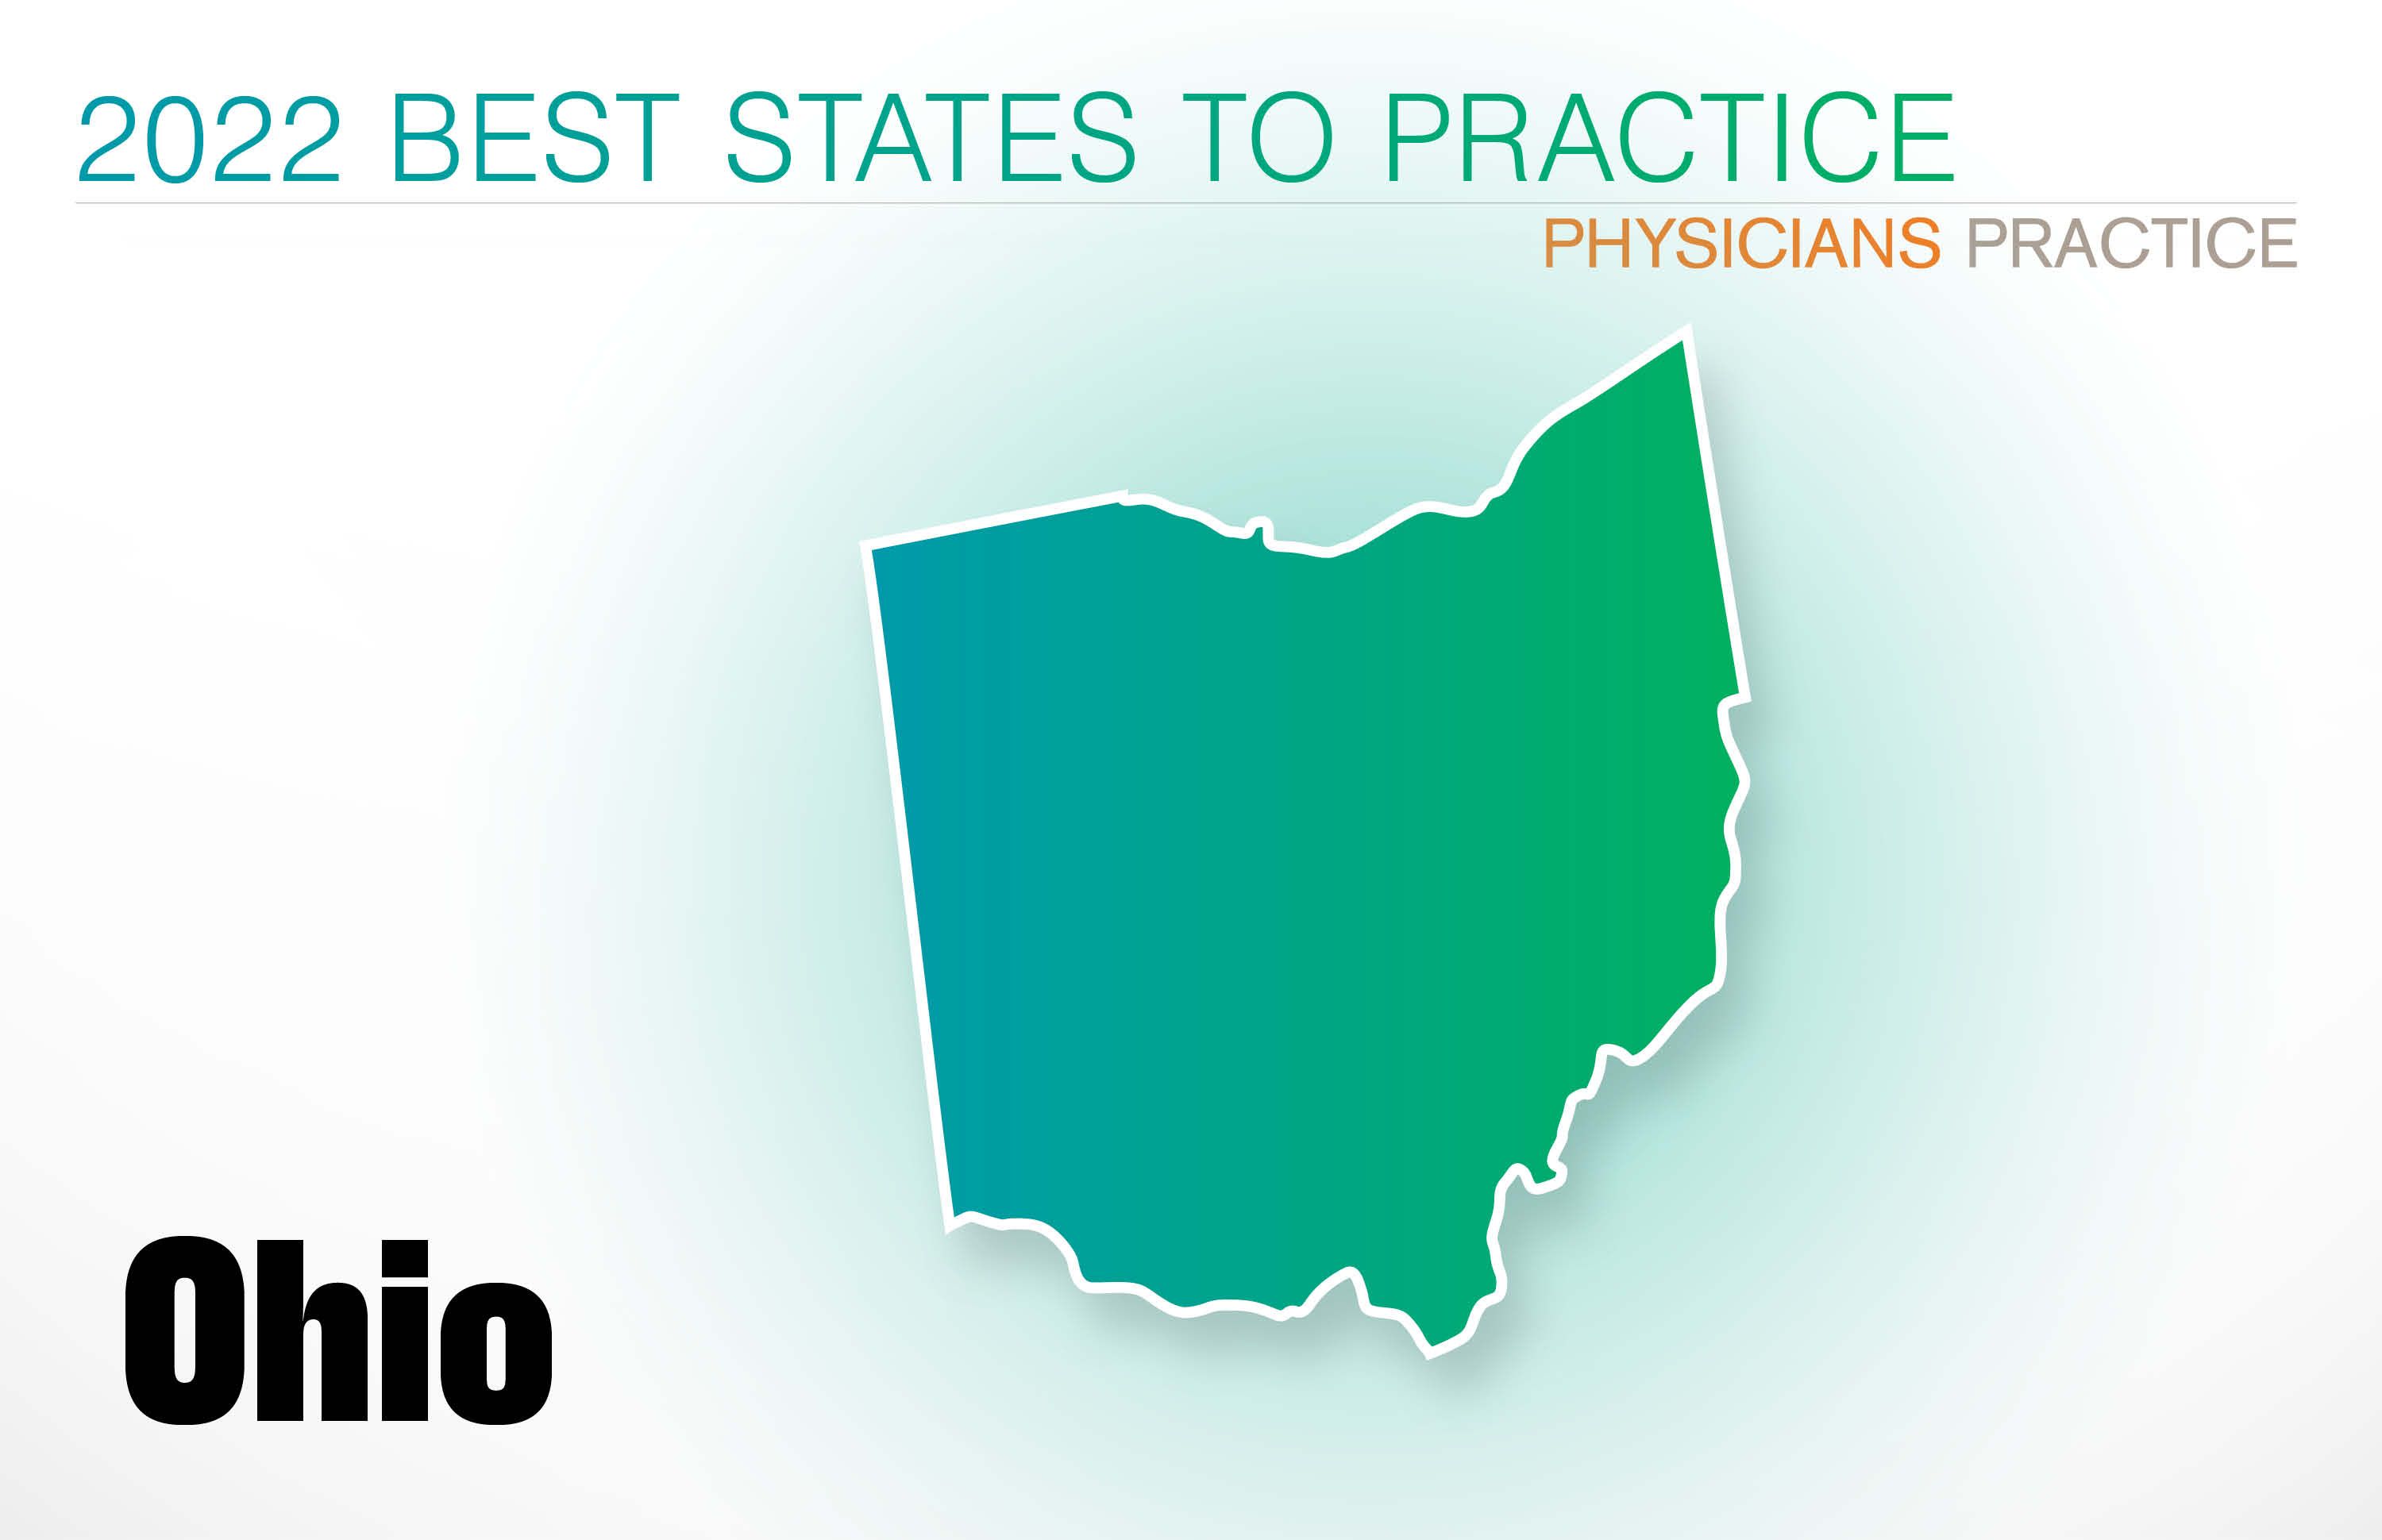 #35 Ohio Rankings: Cost of living: 13 Physician density: 37 Amount of state business taxes collected: 37 Average malpractice insurance rates: 32 Quality of life: 23 GPCI: 36